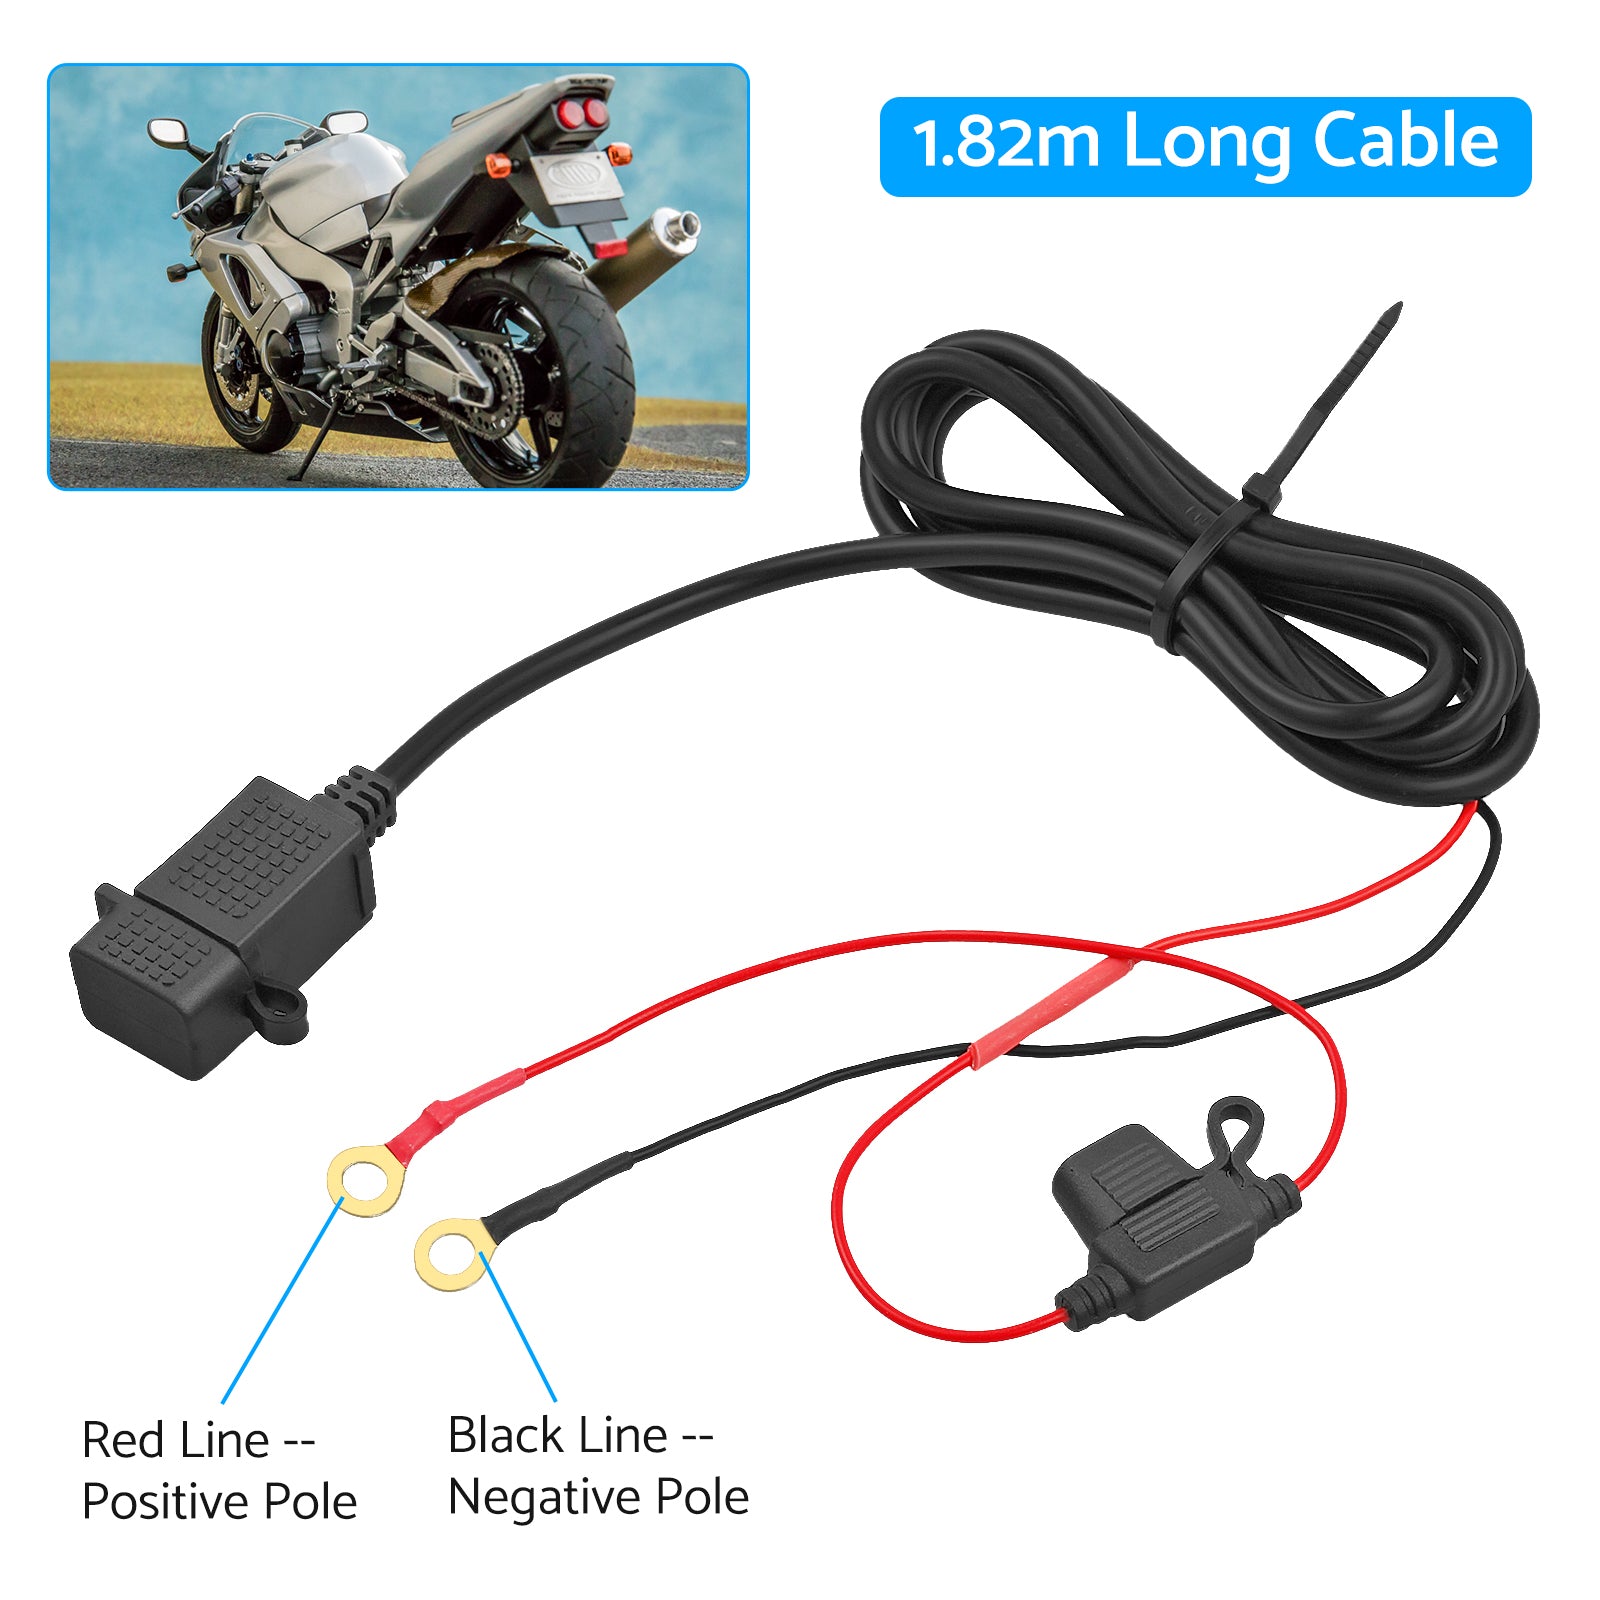 eSynic Professional Waterproof USB Motorcycle Charger